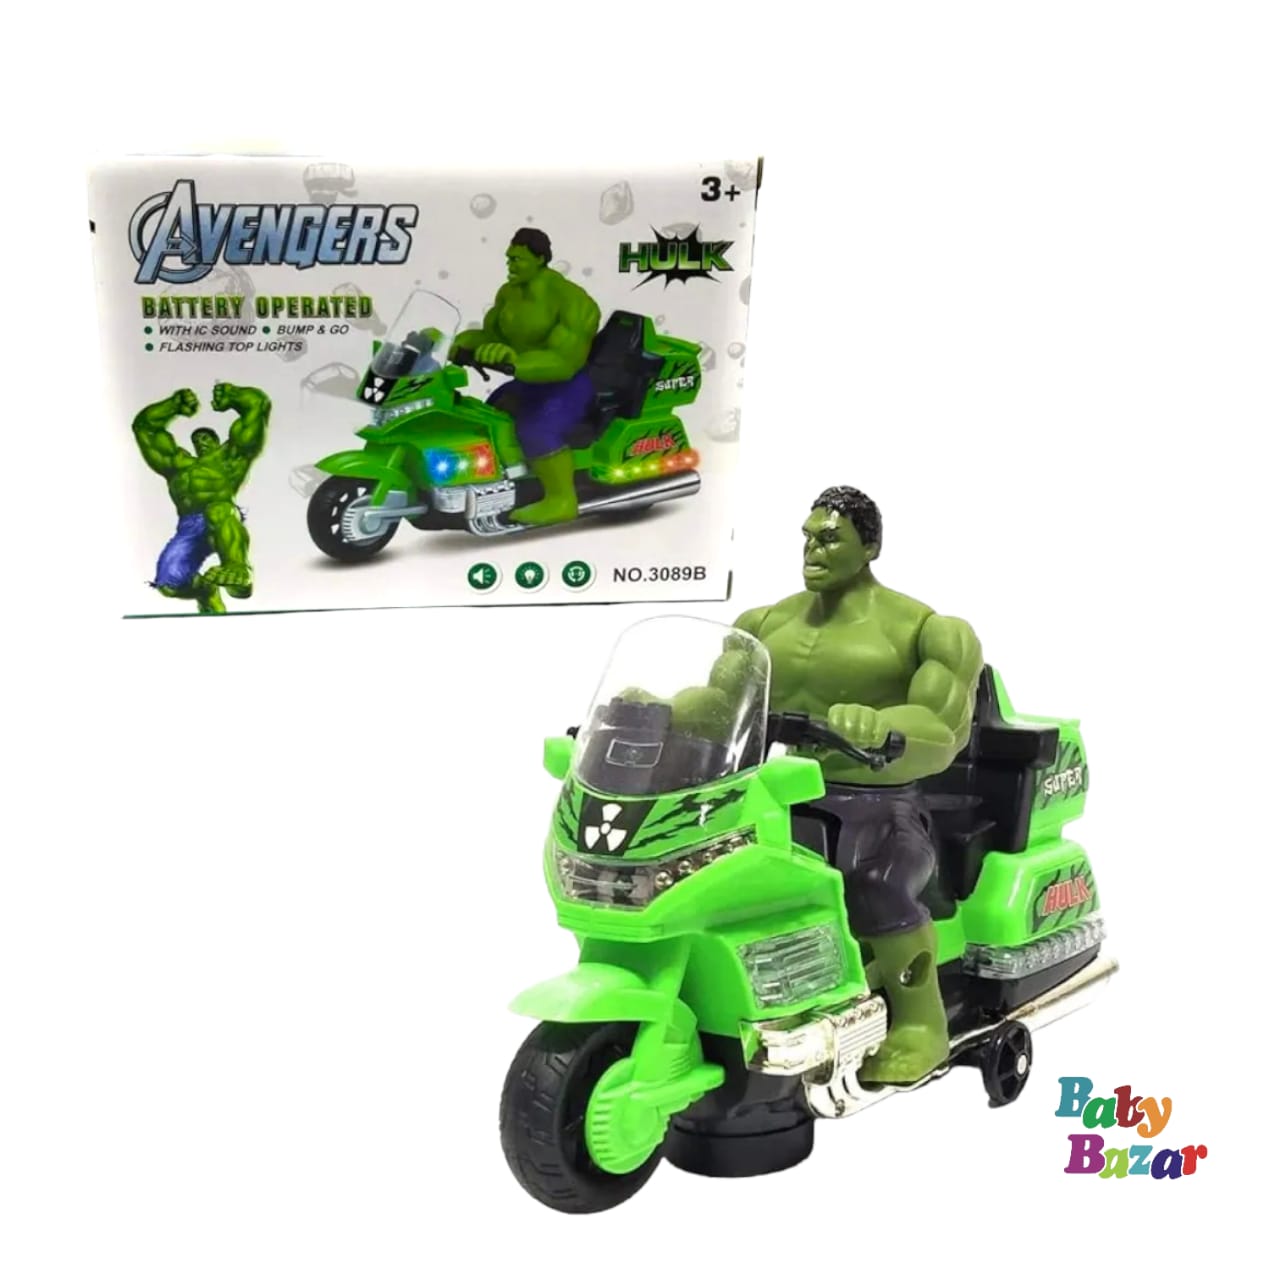 Avengers- Battery Operated Motorcycle with IC Sound and Flashing Lights